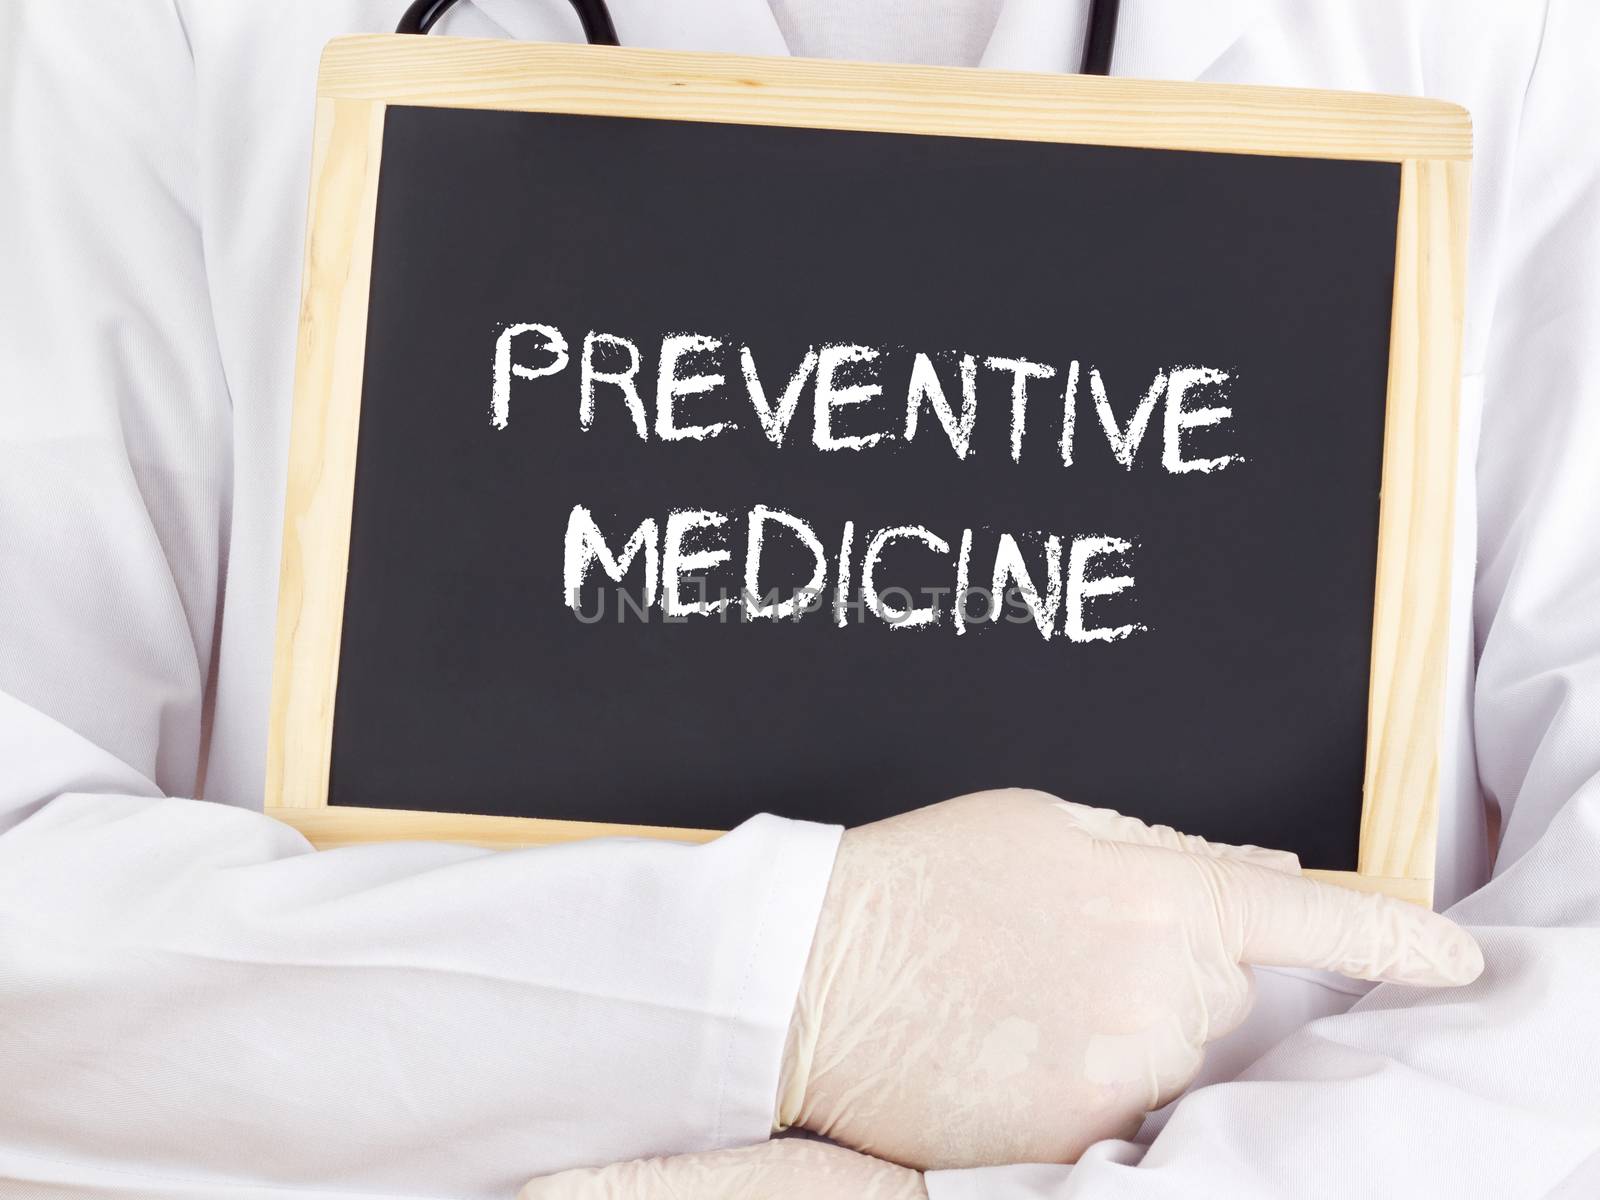 Doctor shows information: preventive medicine by gwolters